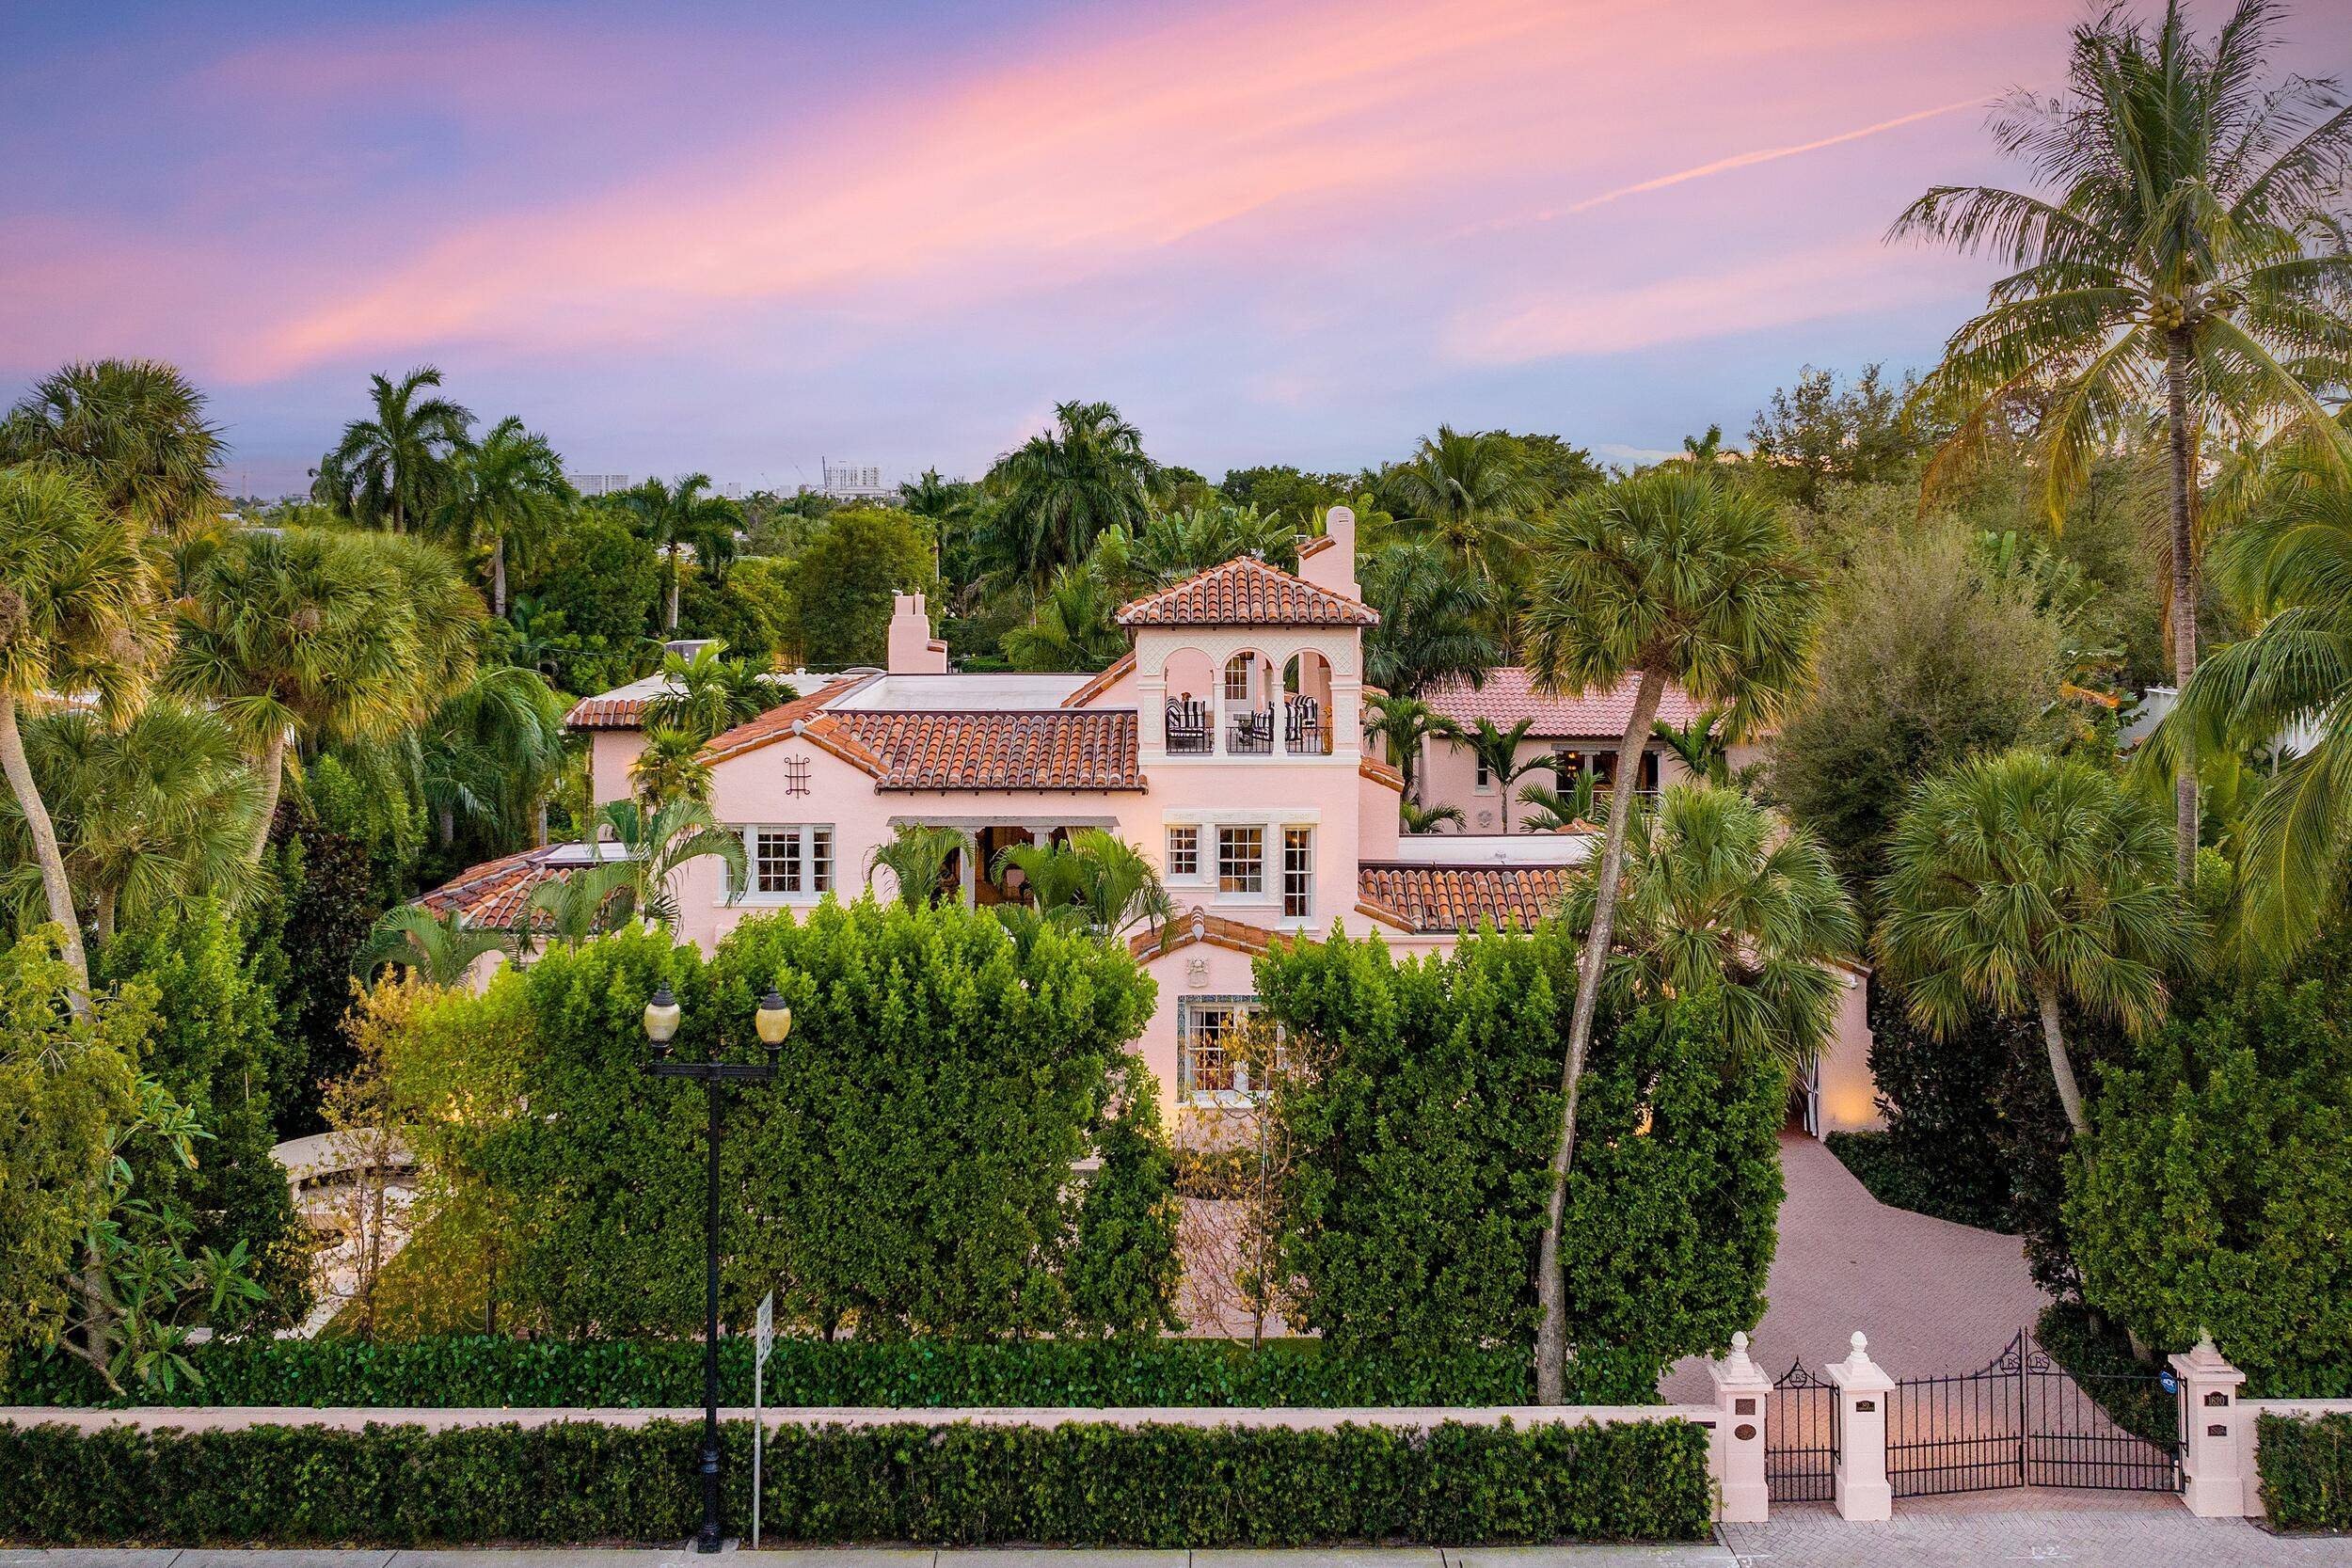 Welcome to The Sheppard Estate, one of Fort Lauderdale's greatest landmark residences.